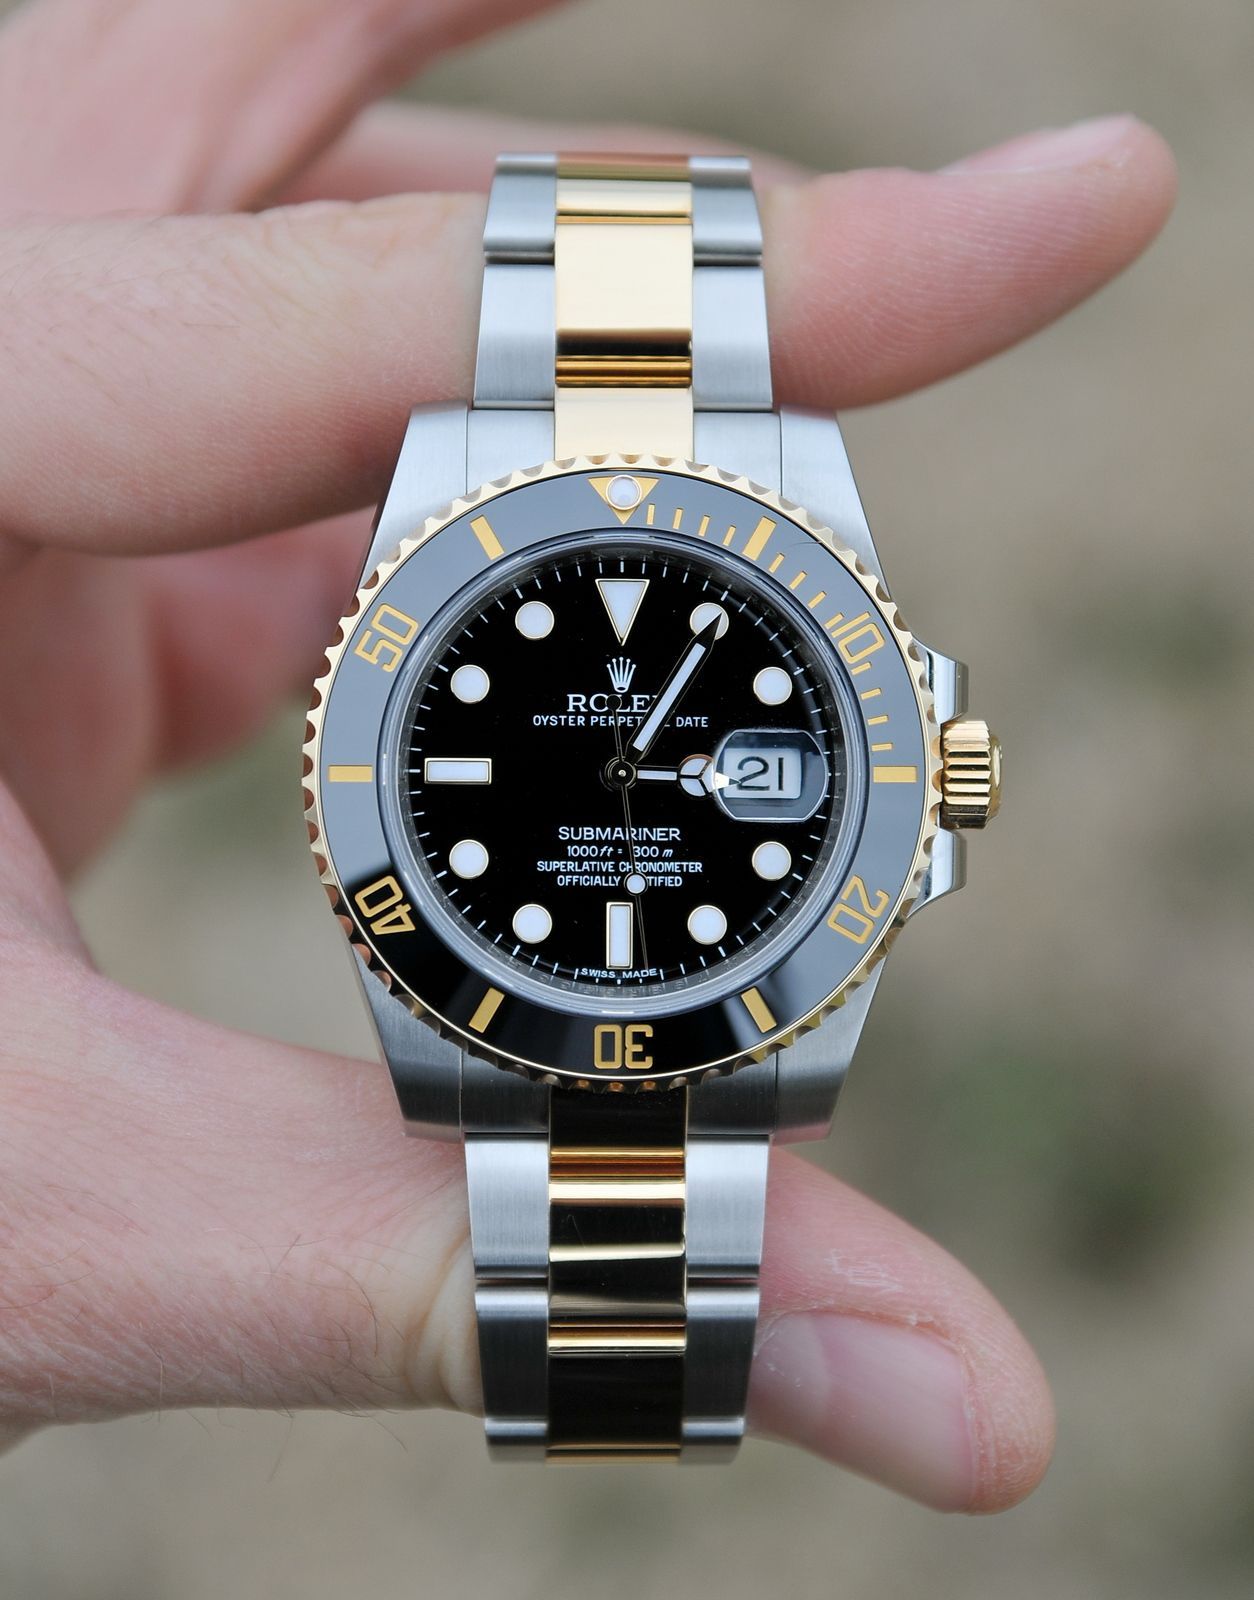 Rolex Submariner. My ideal watches to have for my 30th b’day. Which is still far far away.